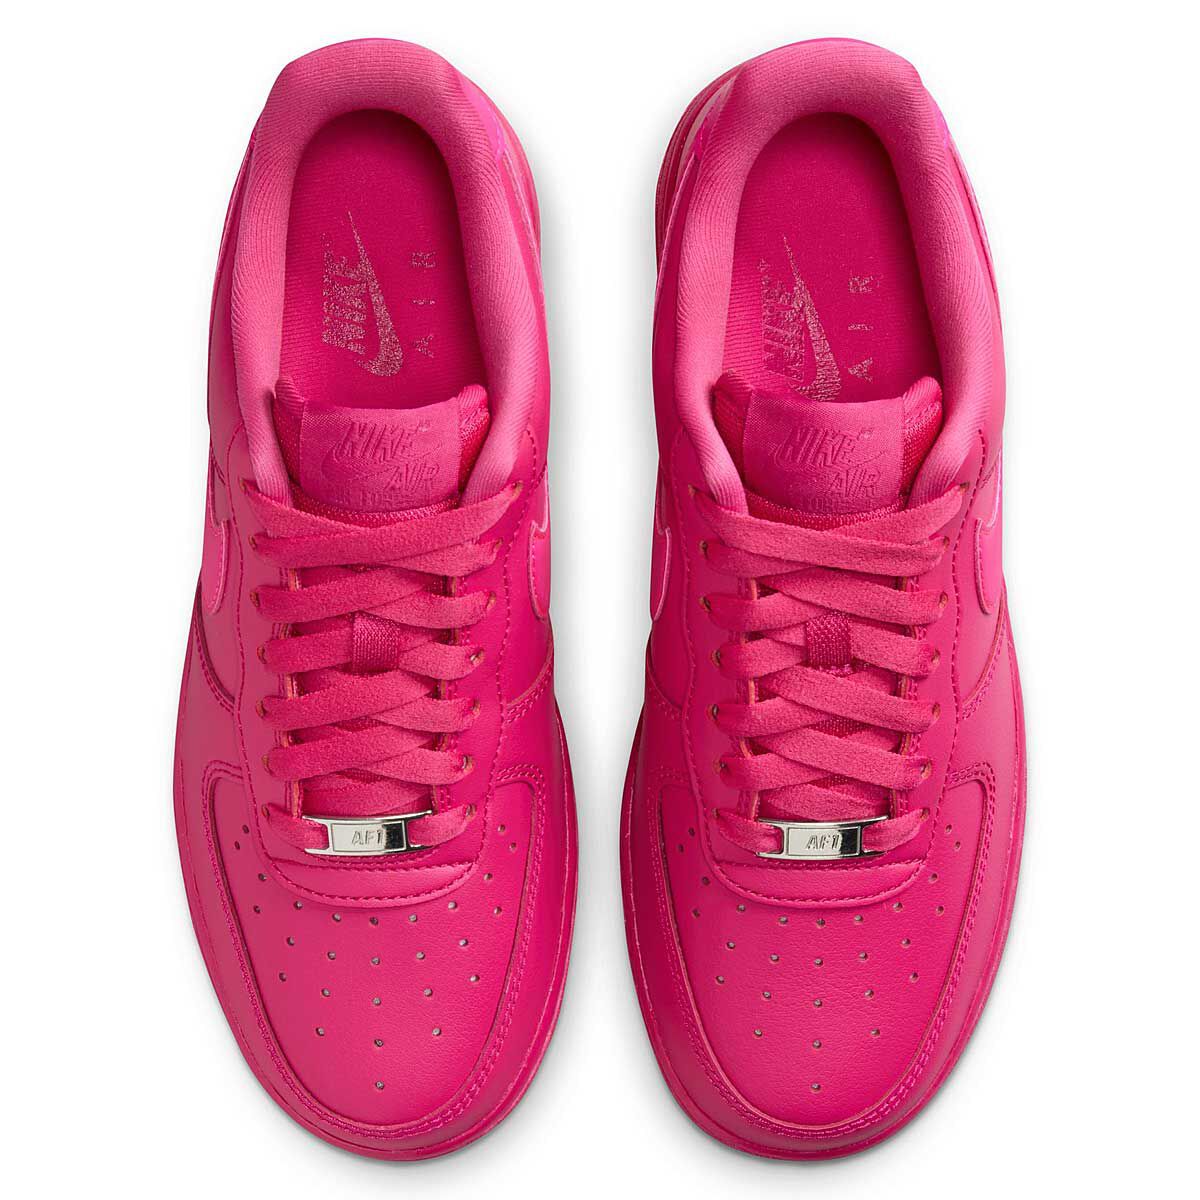 Buy WMNS AIR FORCE 1 ‘07 for EUR 119.90 on KICKZ.com!